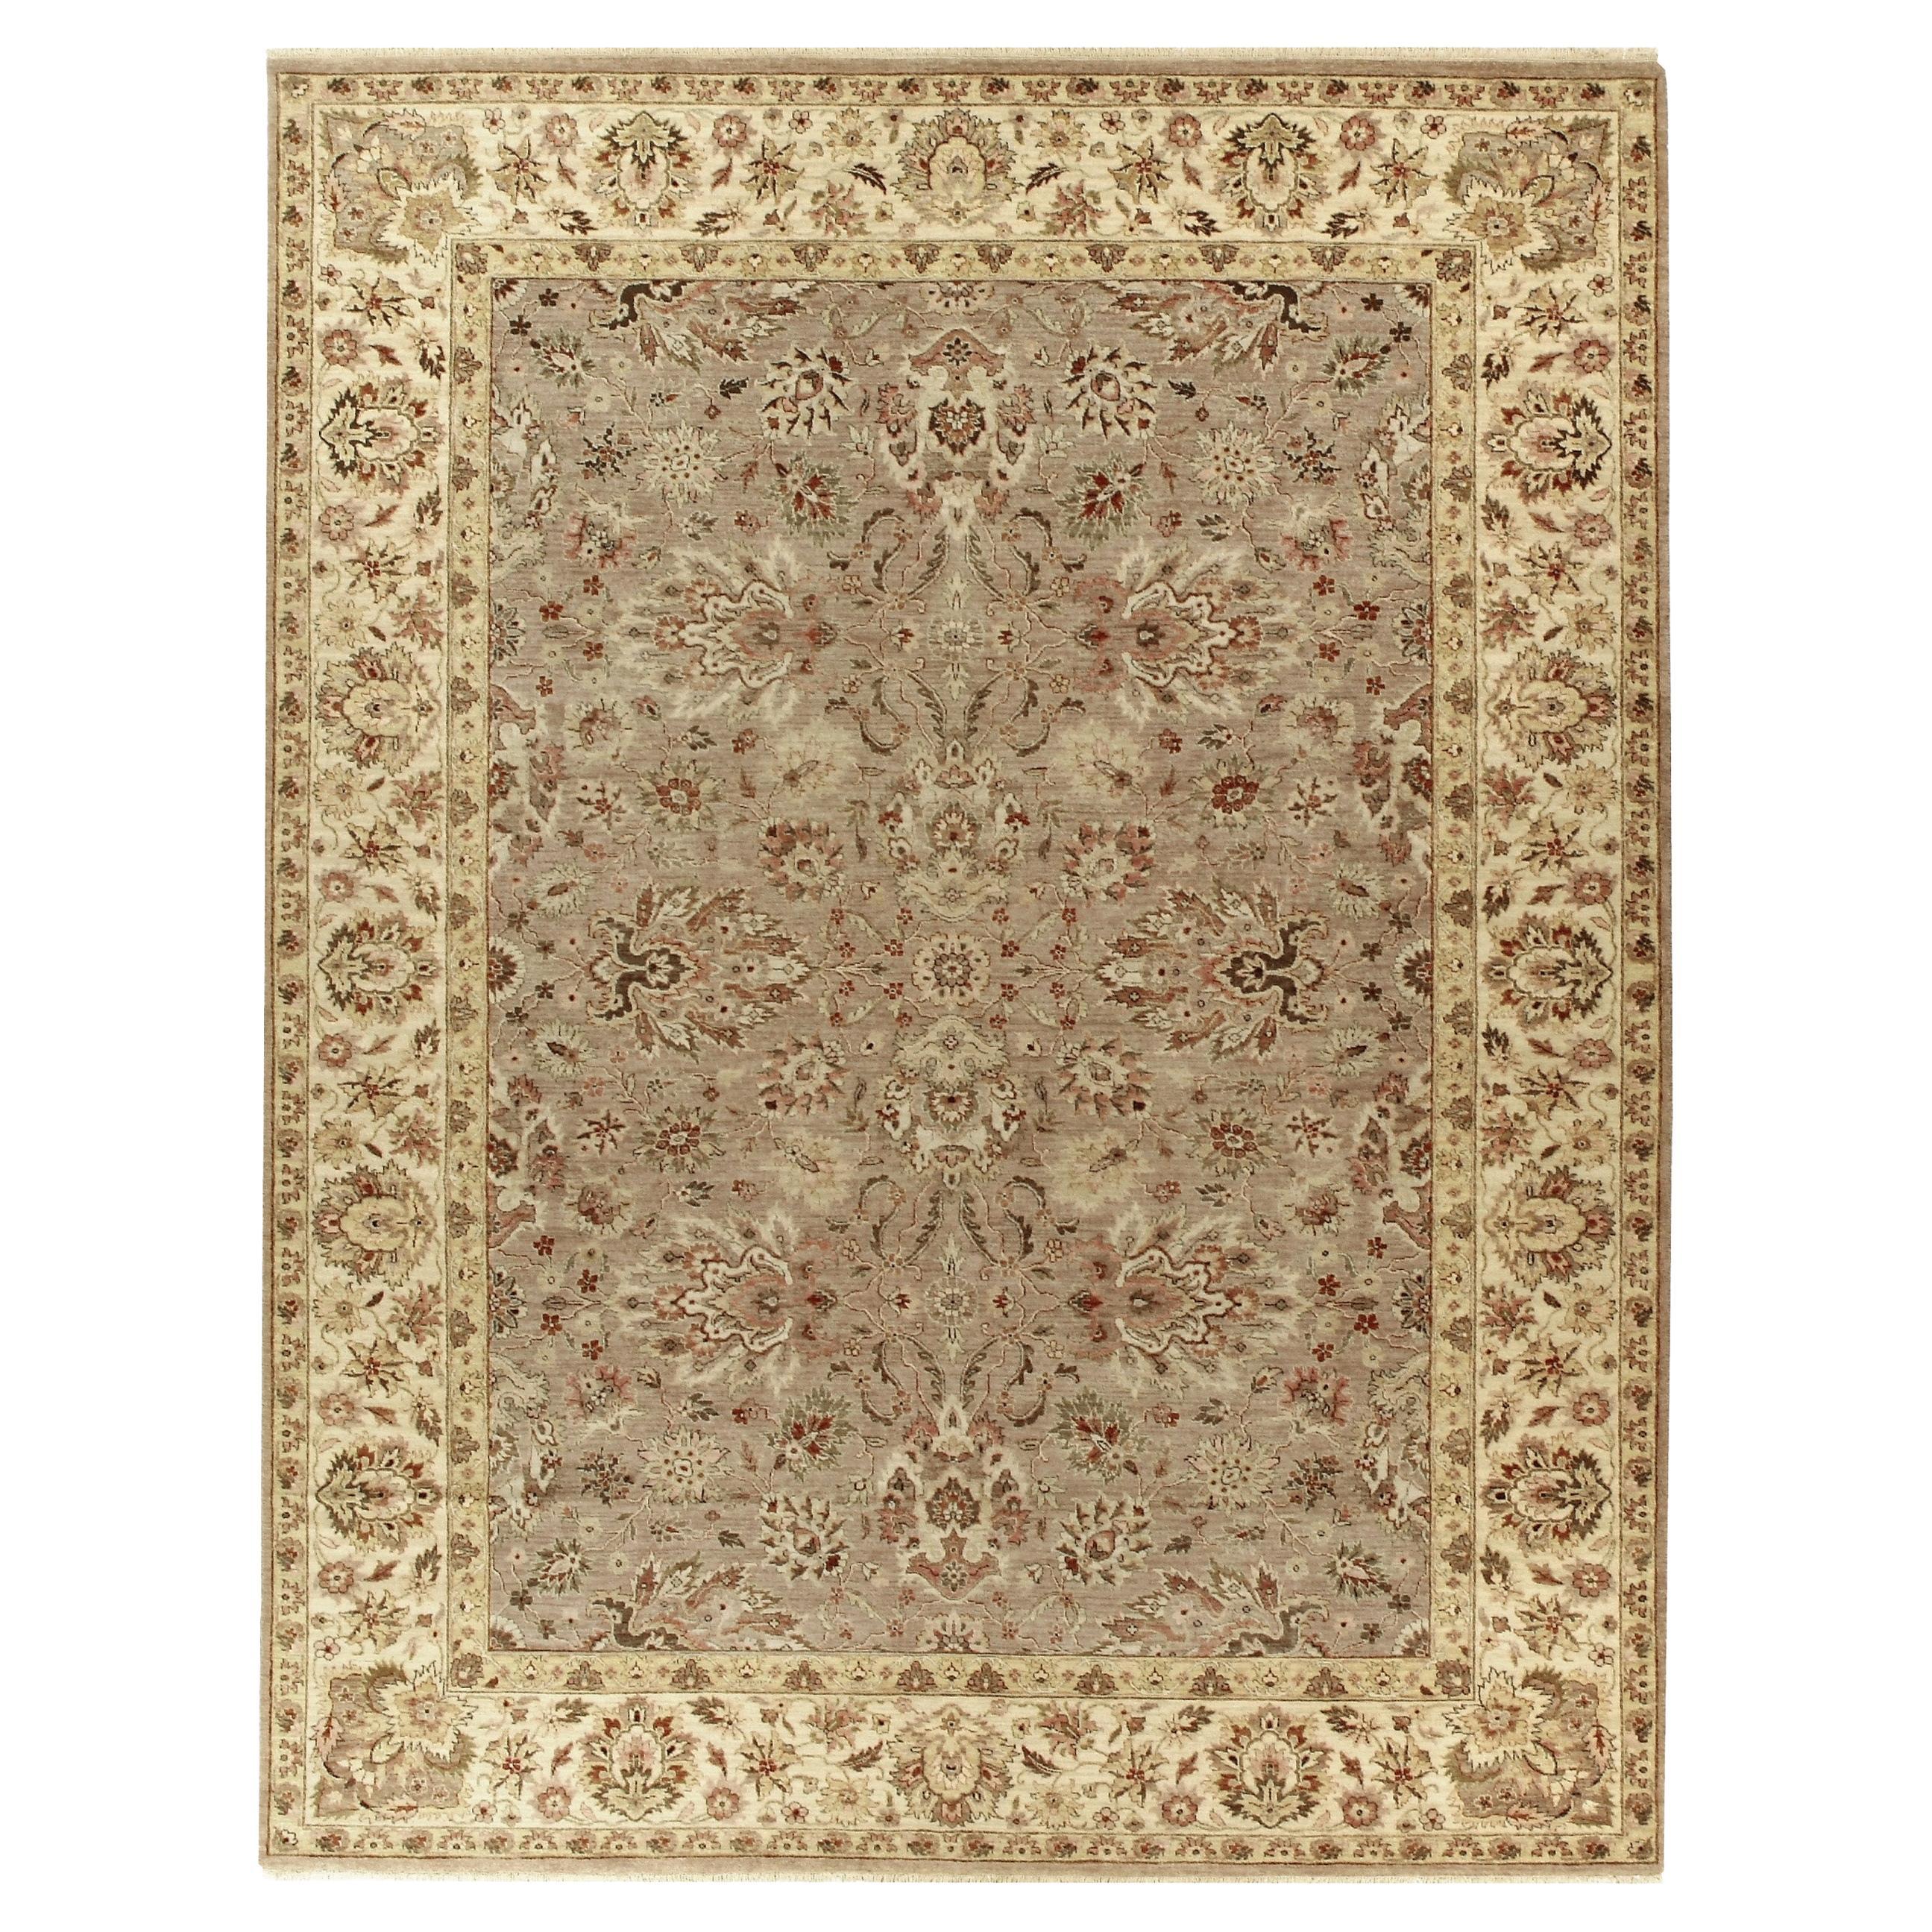 Luxury Traditional Hand-Knotted Agra Taupe/Ivory 14x28 Rug